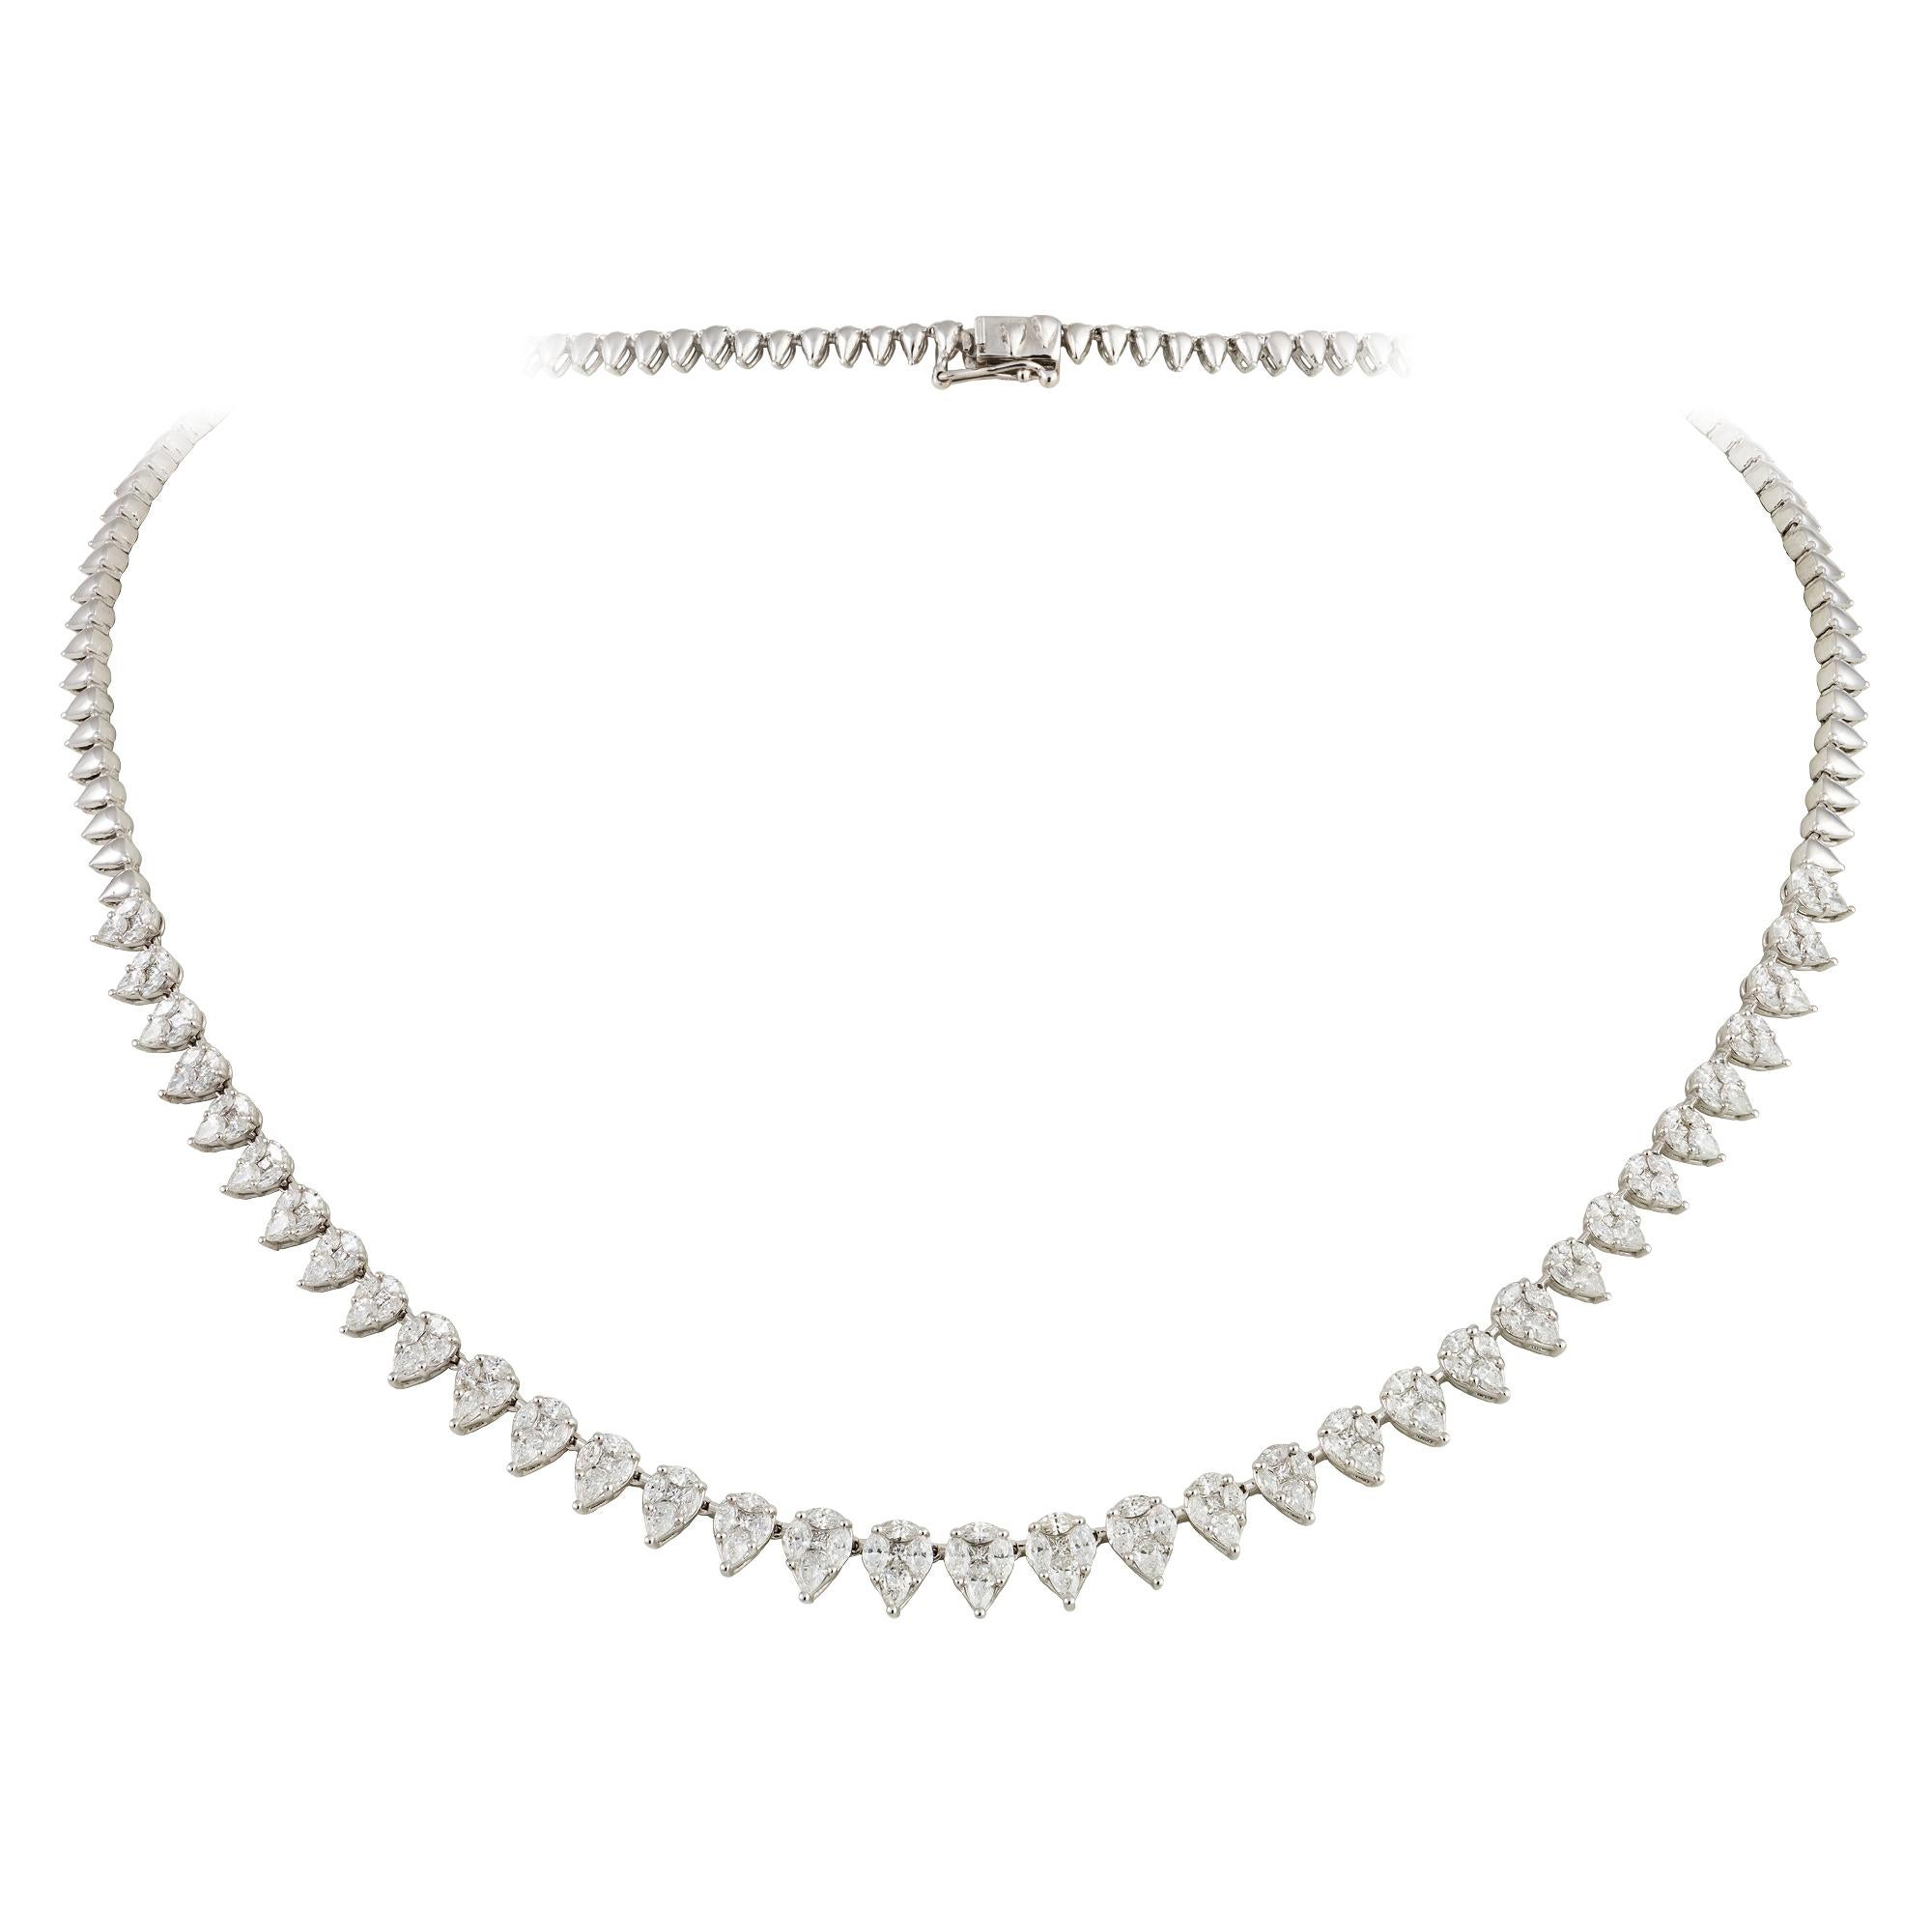 The Following Item we are offering is a Rare 18KT White Gold Triple Flower Diamond Strand Necklace. Necklace is comprised of Finely Set Gorgeous Glittering Diamond in a strand and 3 Large Cluster of Flowers.!! T.C.W. Approx 5.50CTS!! This Gorgeous